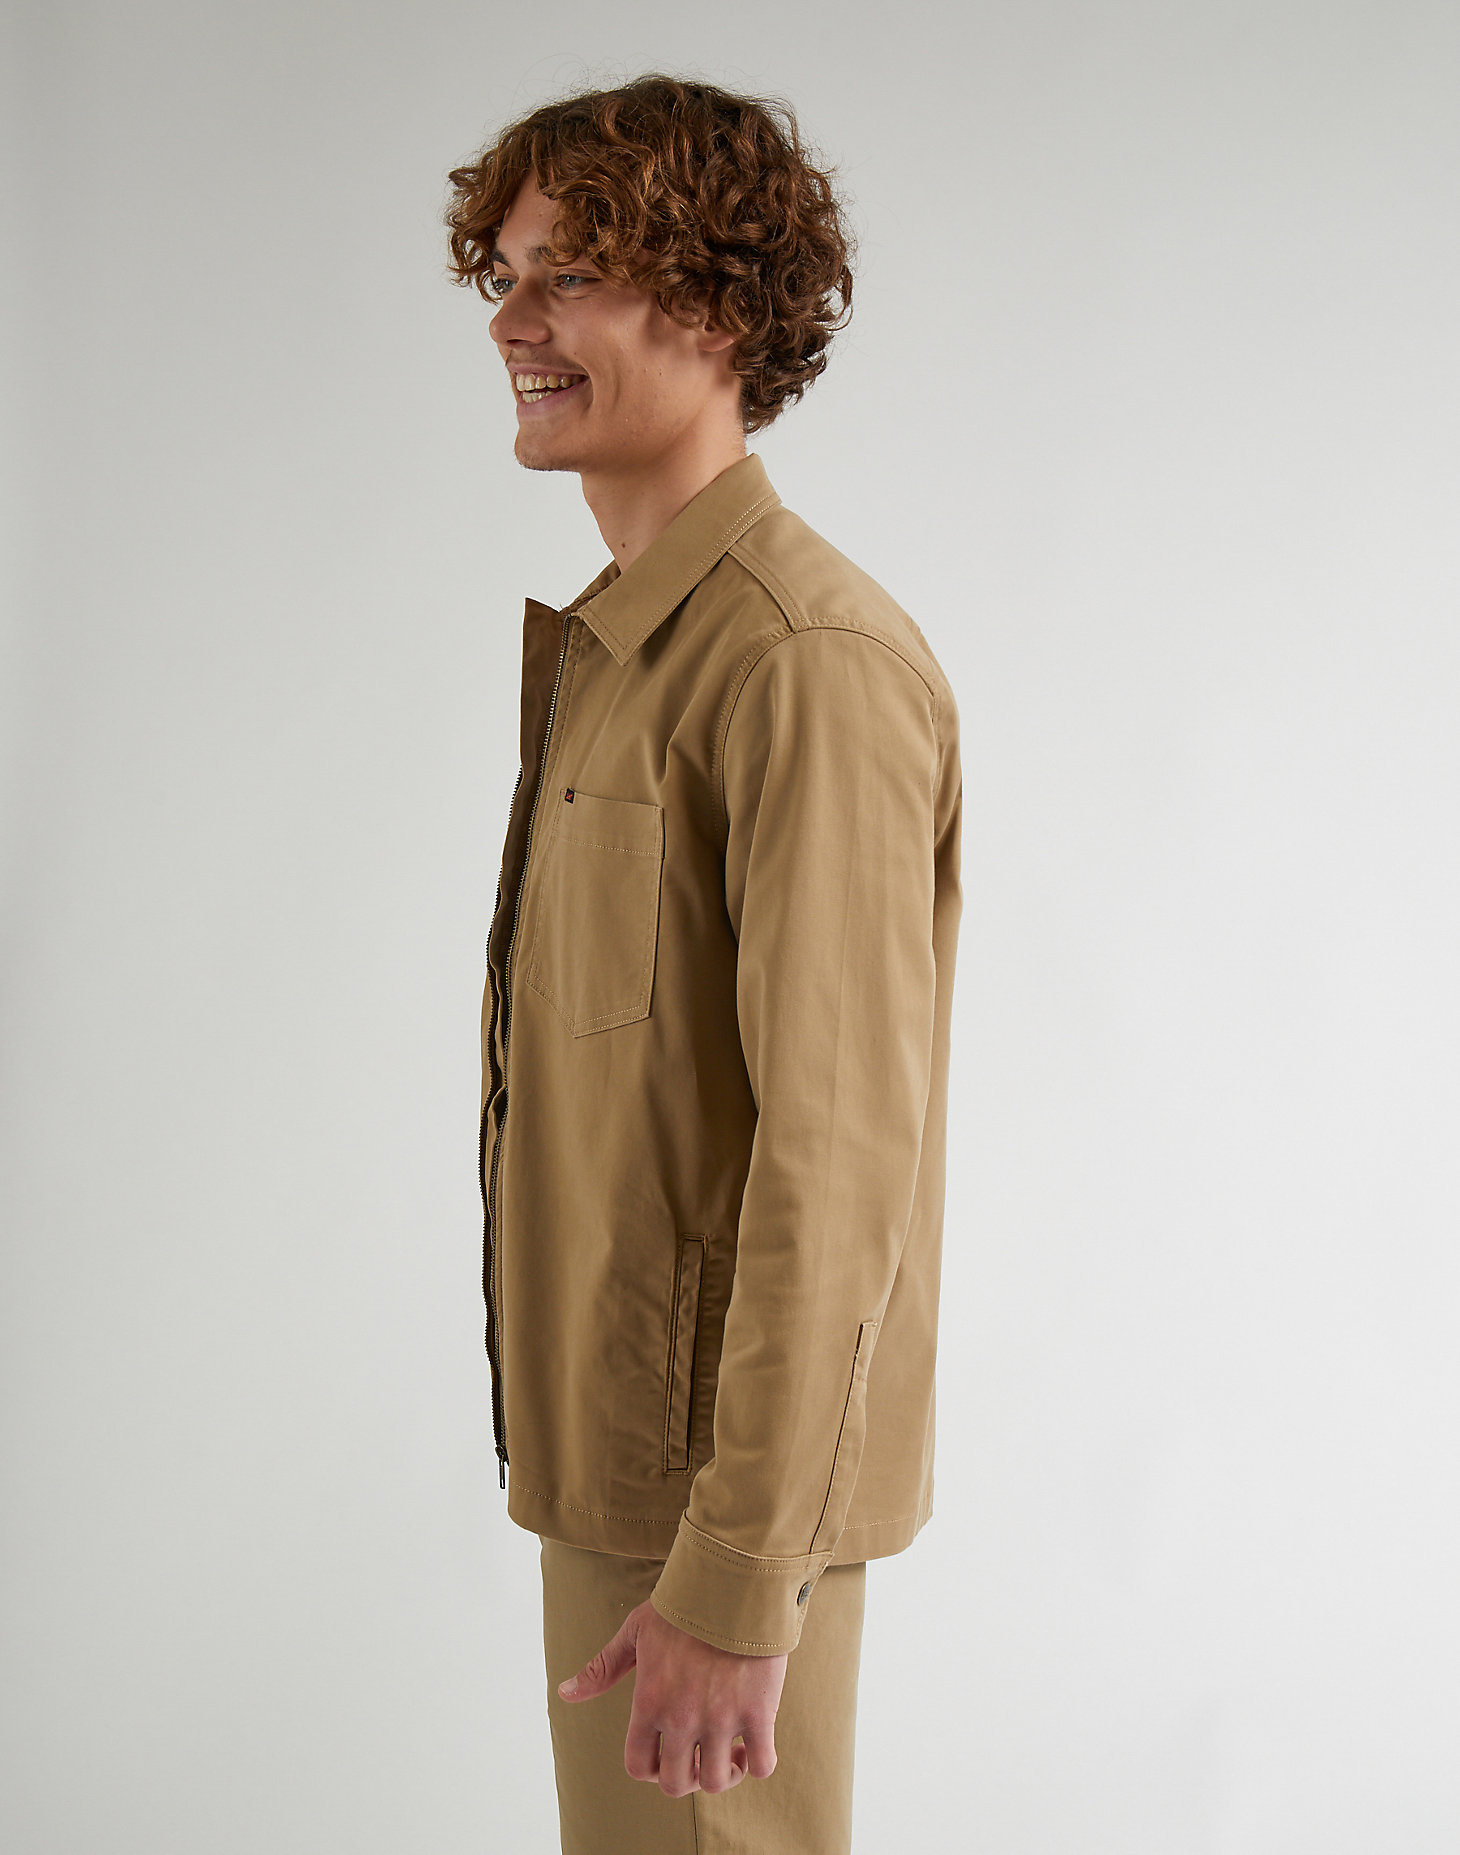 Relaxed Chetopa Overshirt in Clay alternative view 3